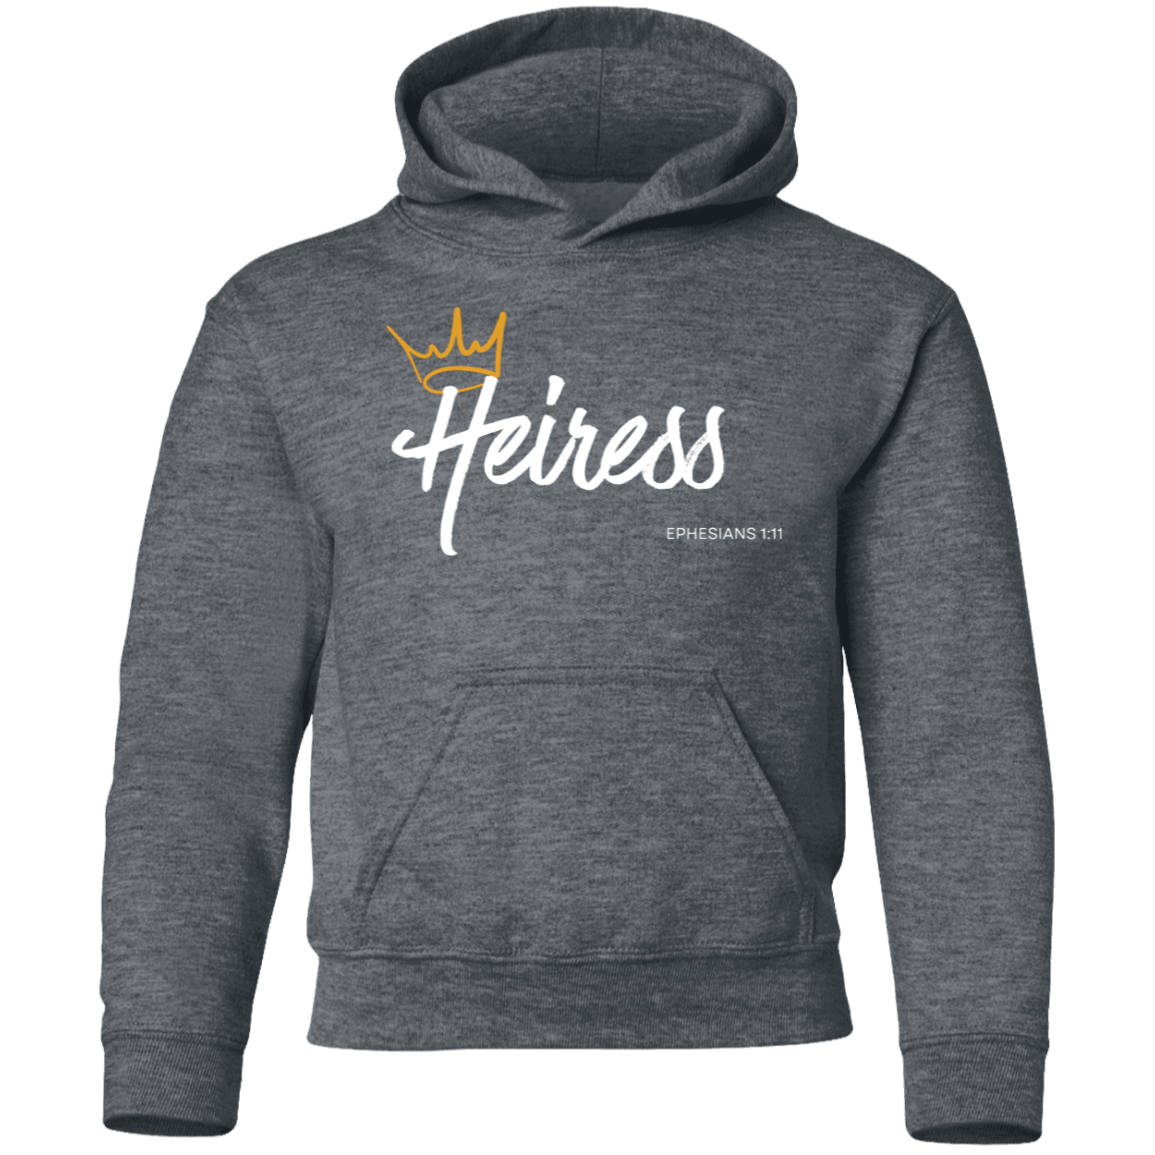 Heiress to Him Eph 1:11 Youth Hoodie